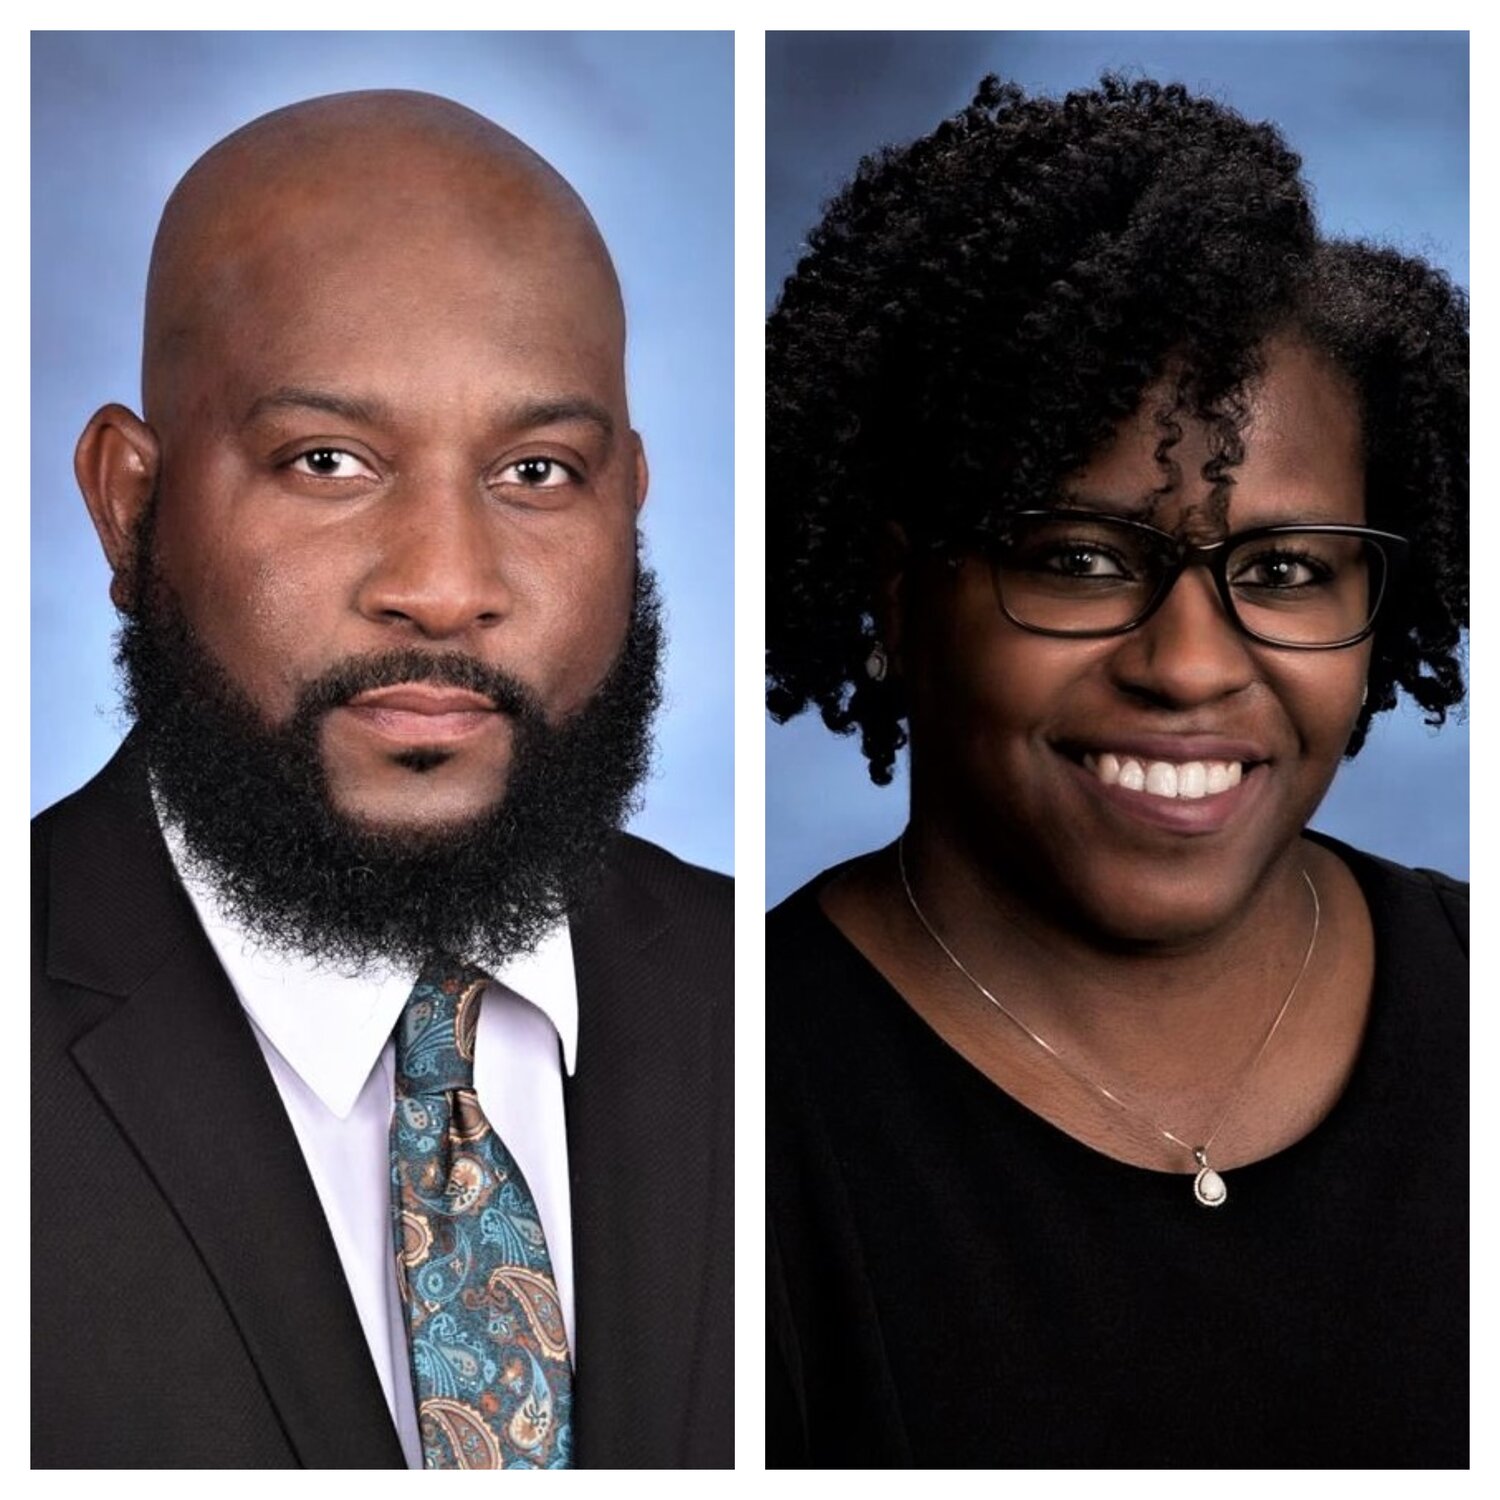 Terry Sanford High School principal Royvell Godbolt and assistant principal Quantisha Spencer have been suspended with pay during a school district investigation.